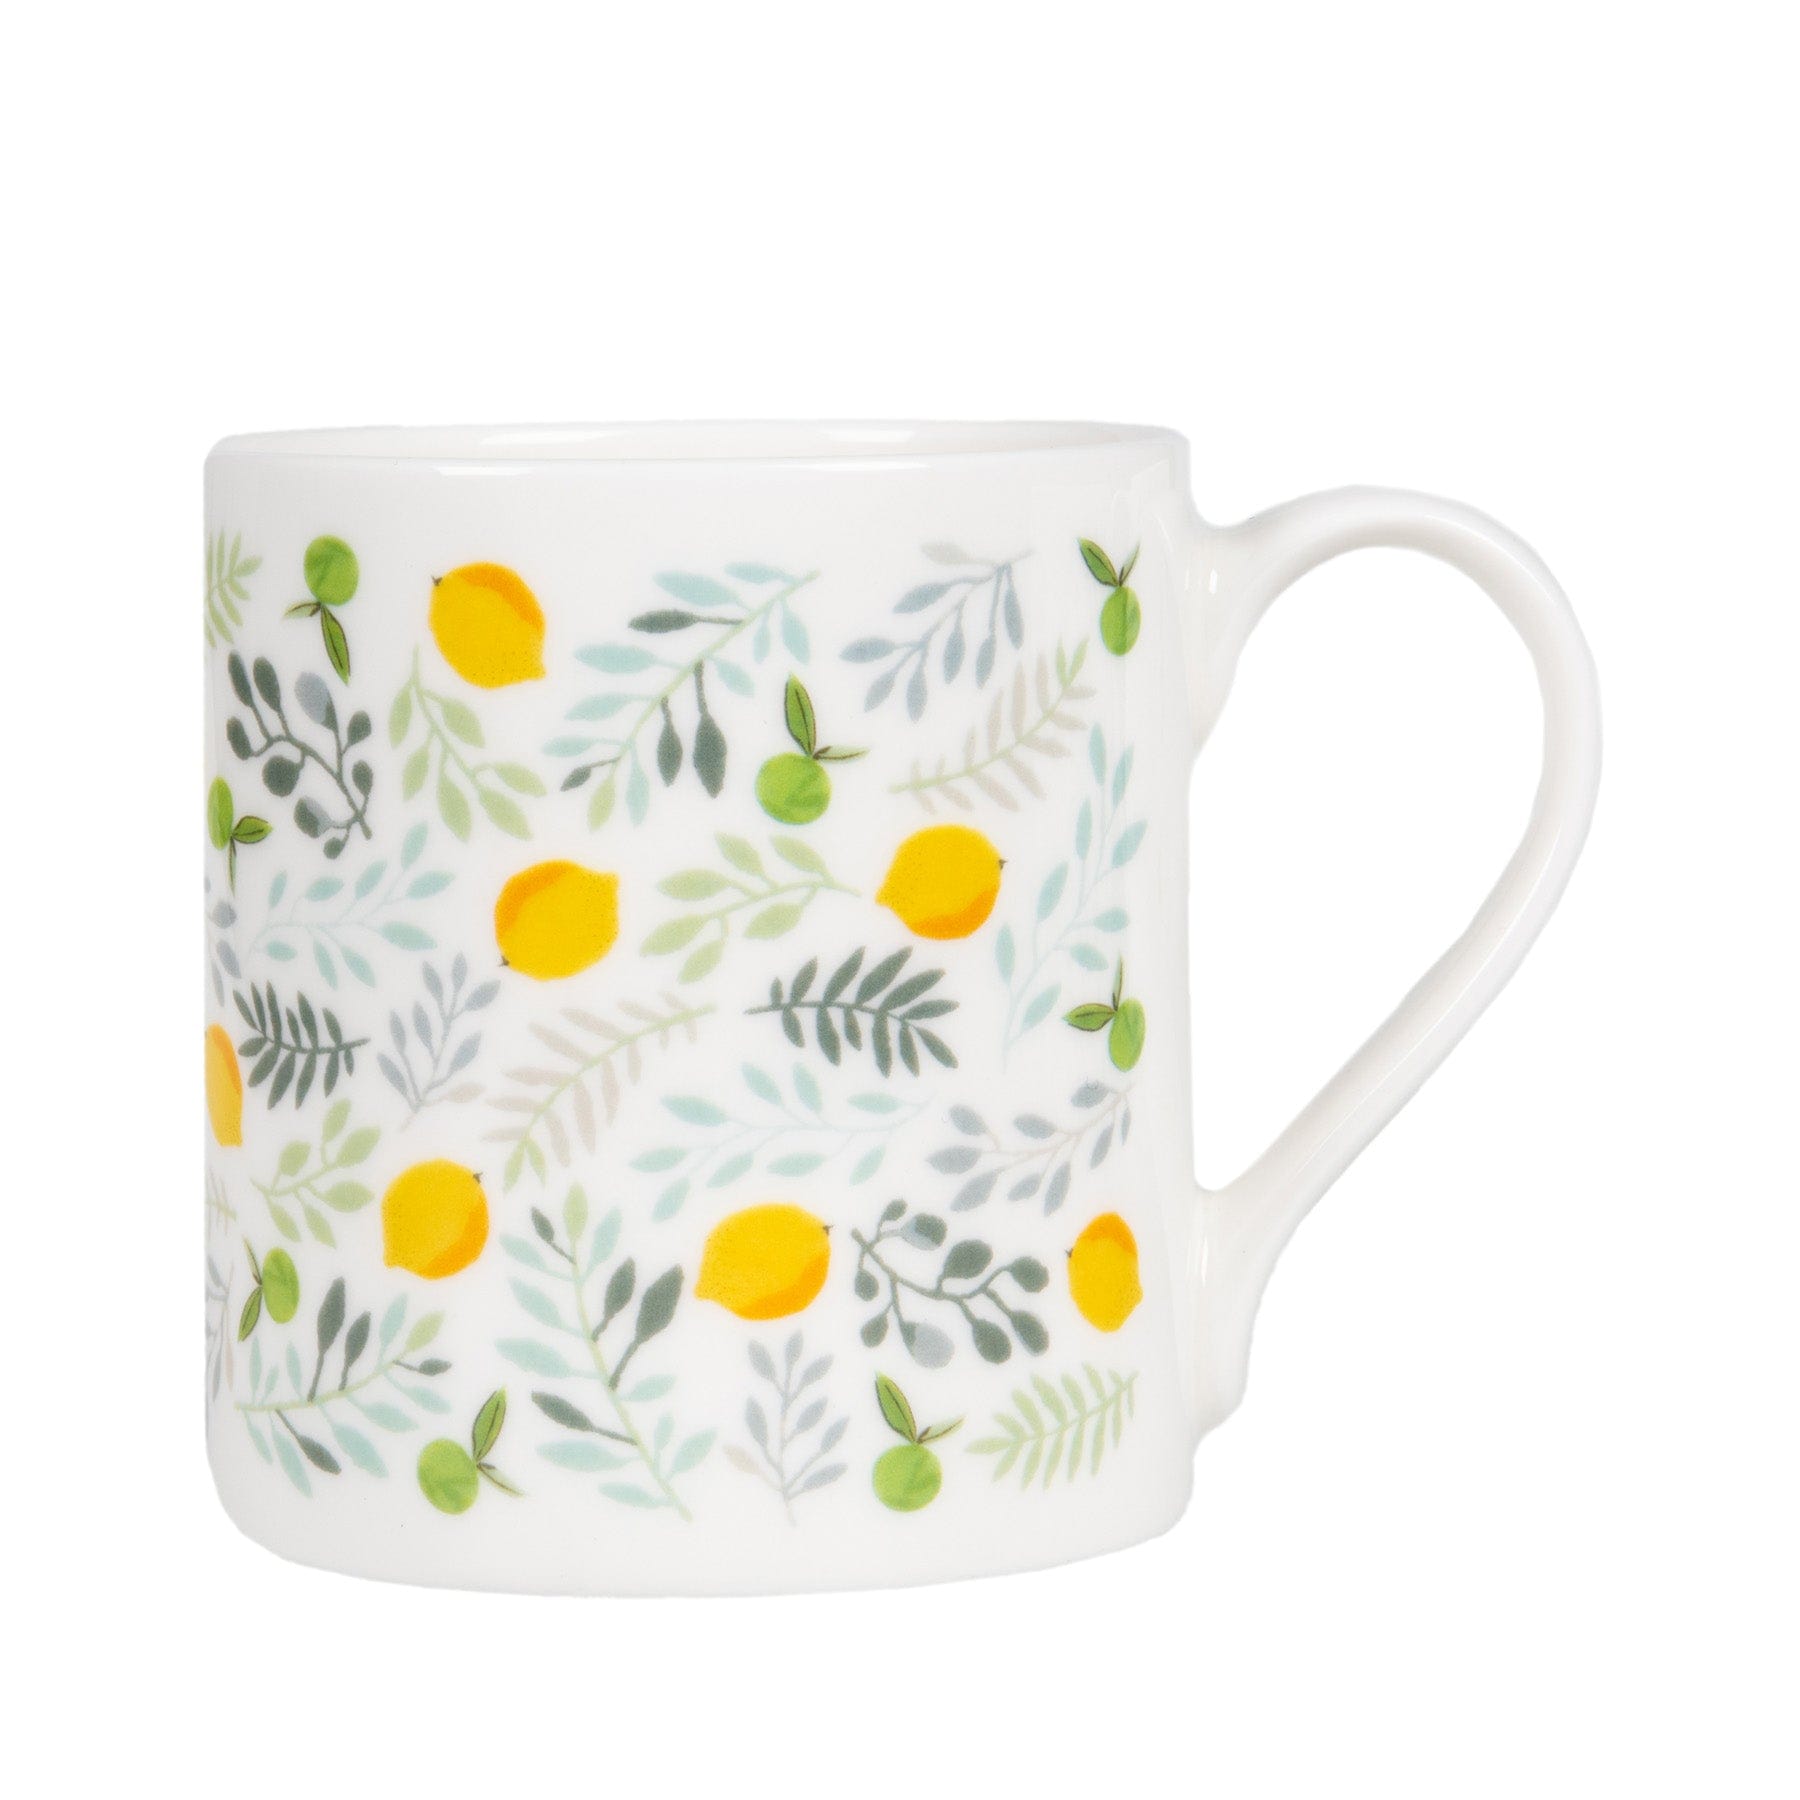 White ceramic mug with floral and citrus pattern, lemon and leaf design, isolated on white background, porcelain cup with handle